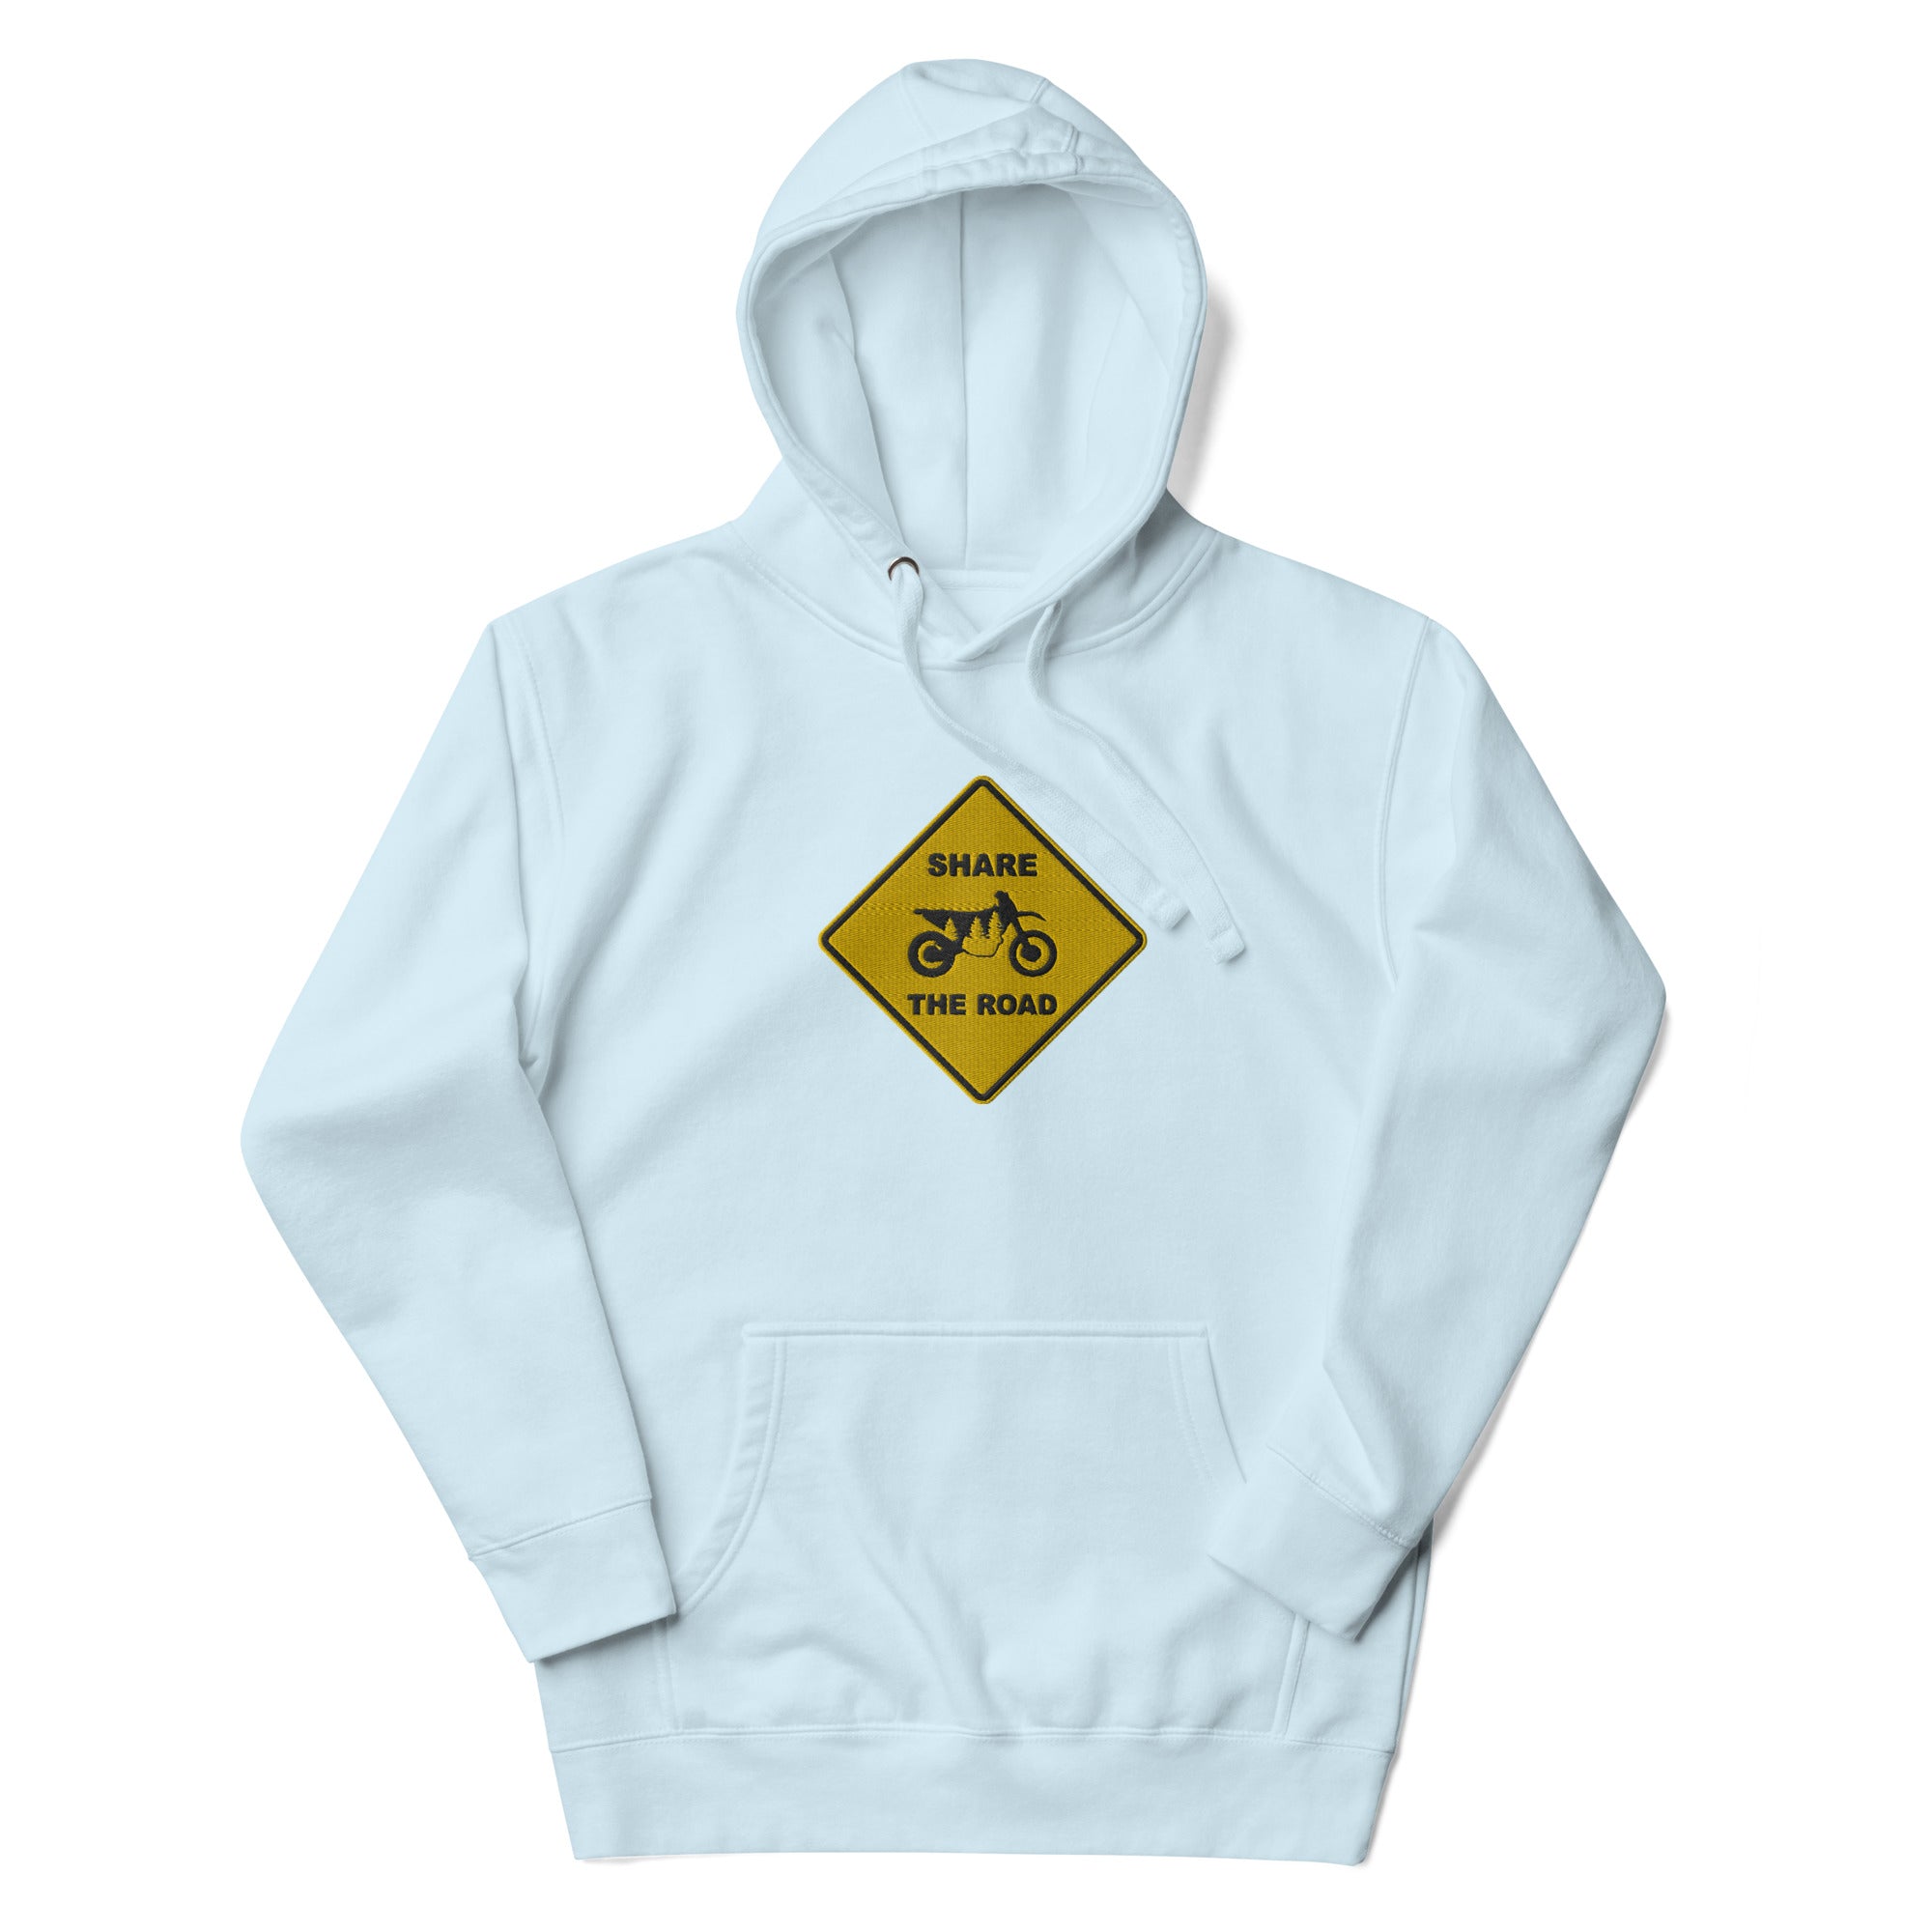 Share The Road Hoodie, Embroidered